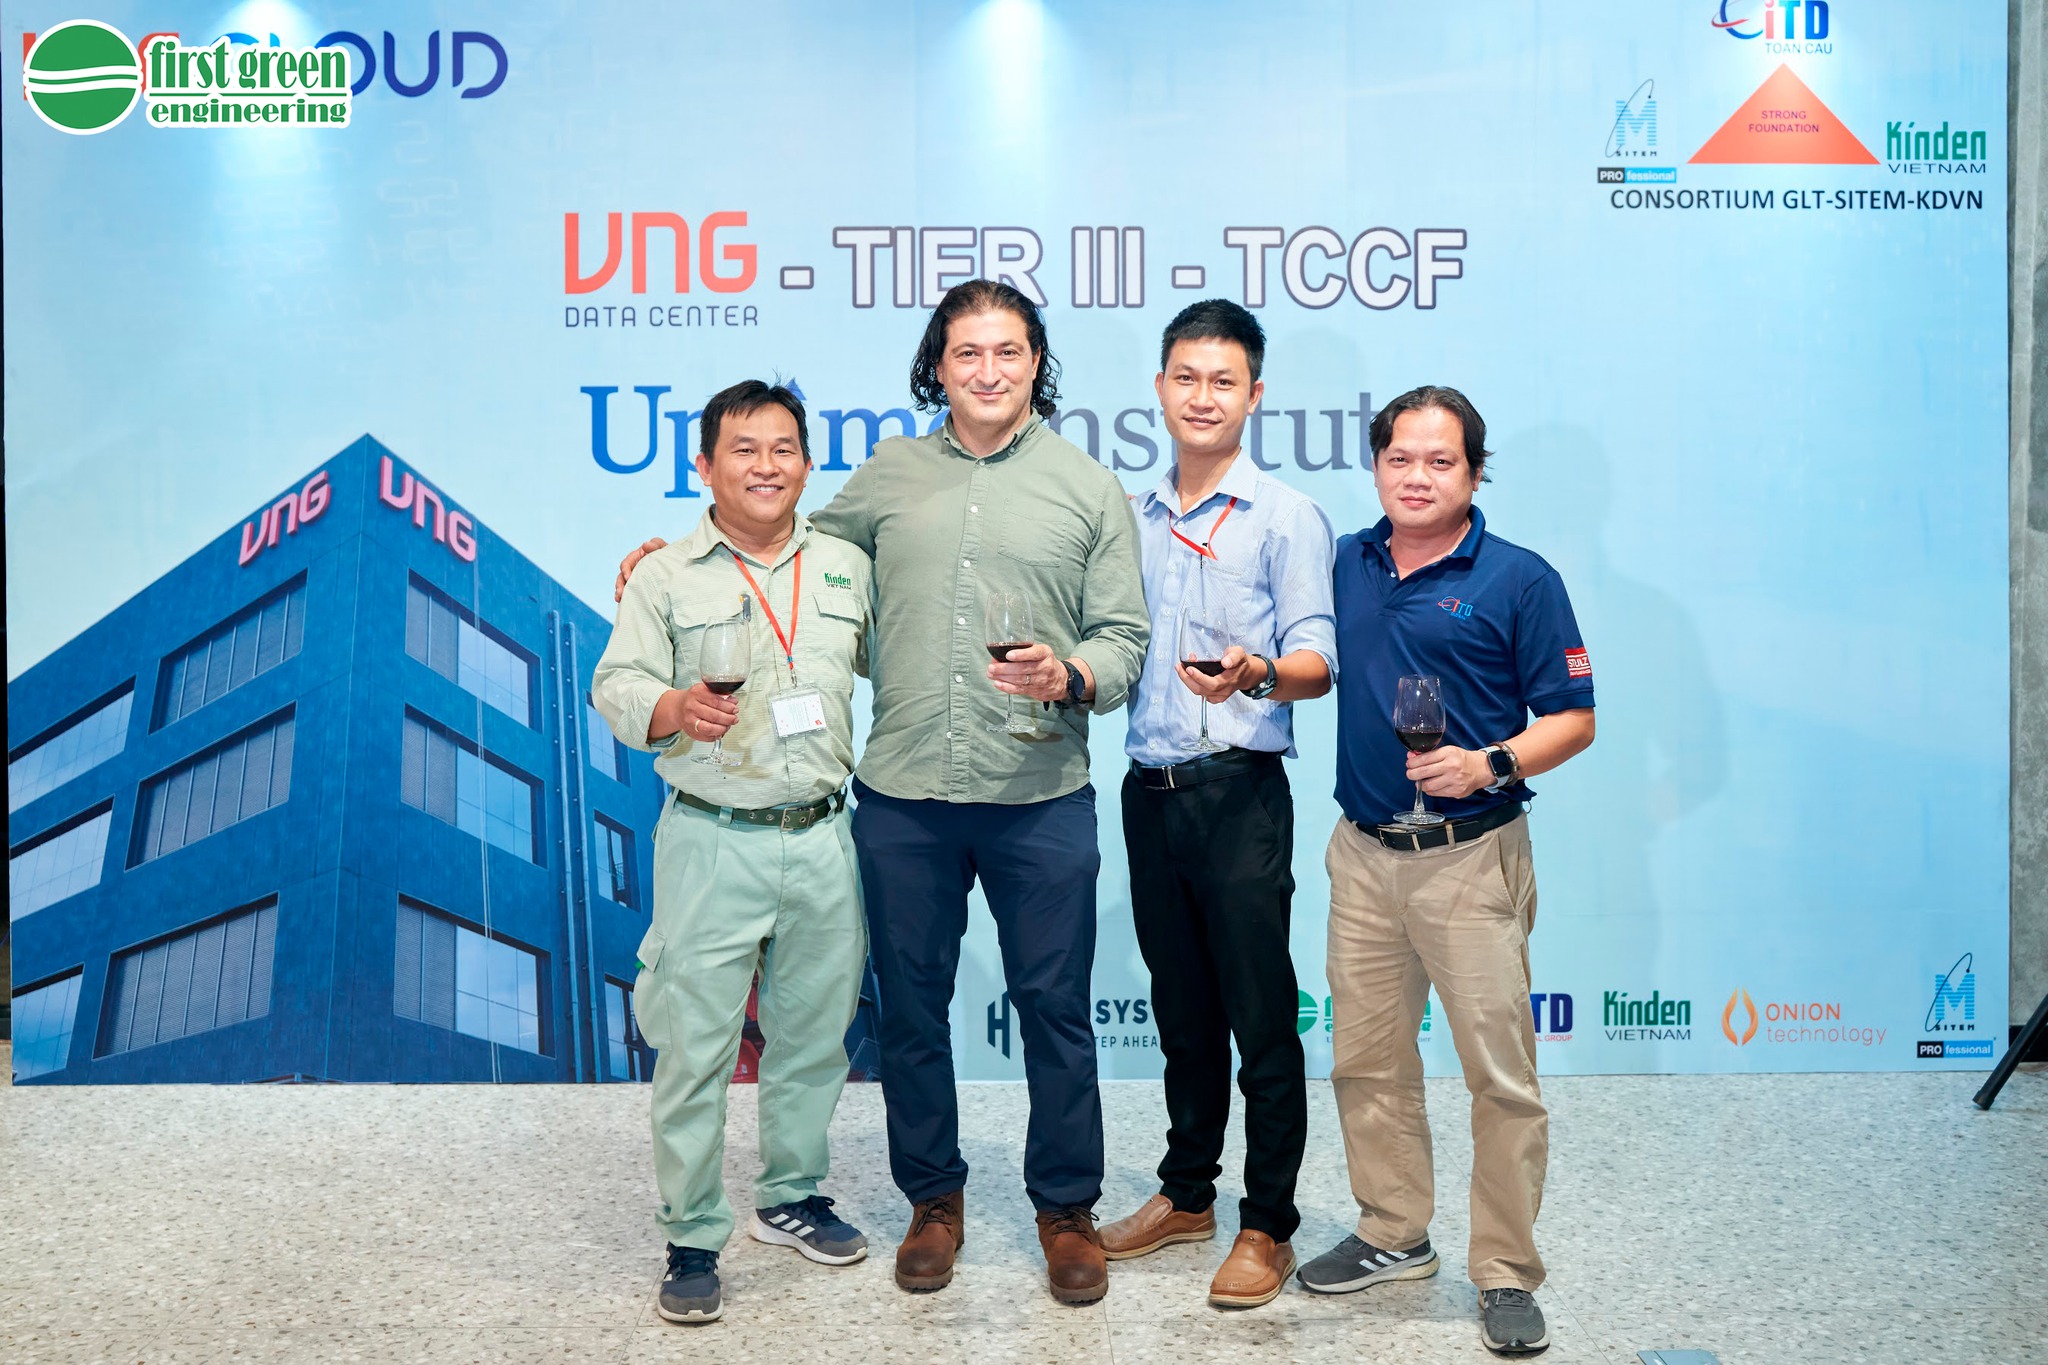 FIRST GREEN ENGINEERING OFFICIALLY COMPLETED THE TCCF TEST OF UPTIME INSTITUTE